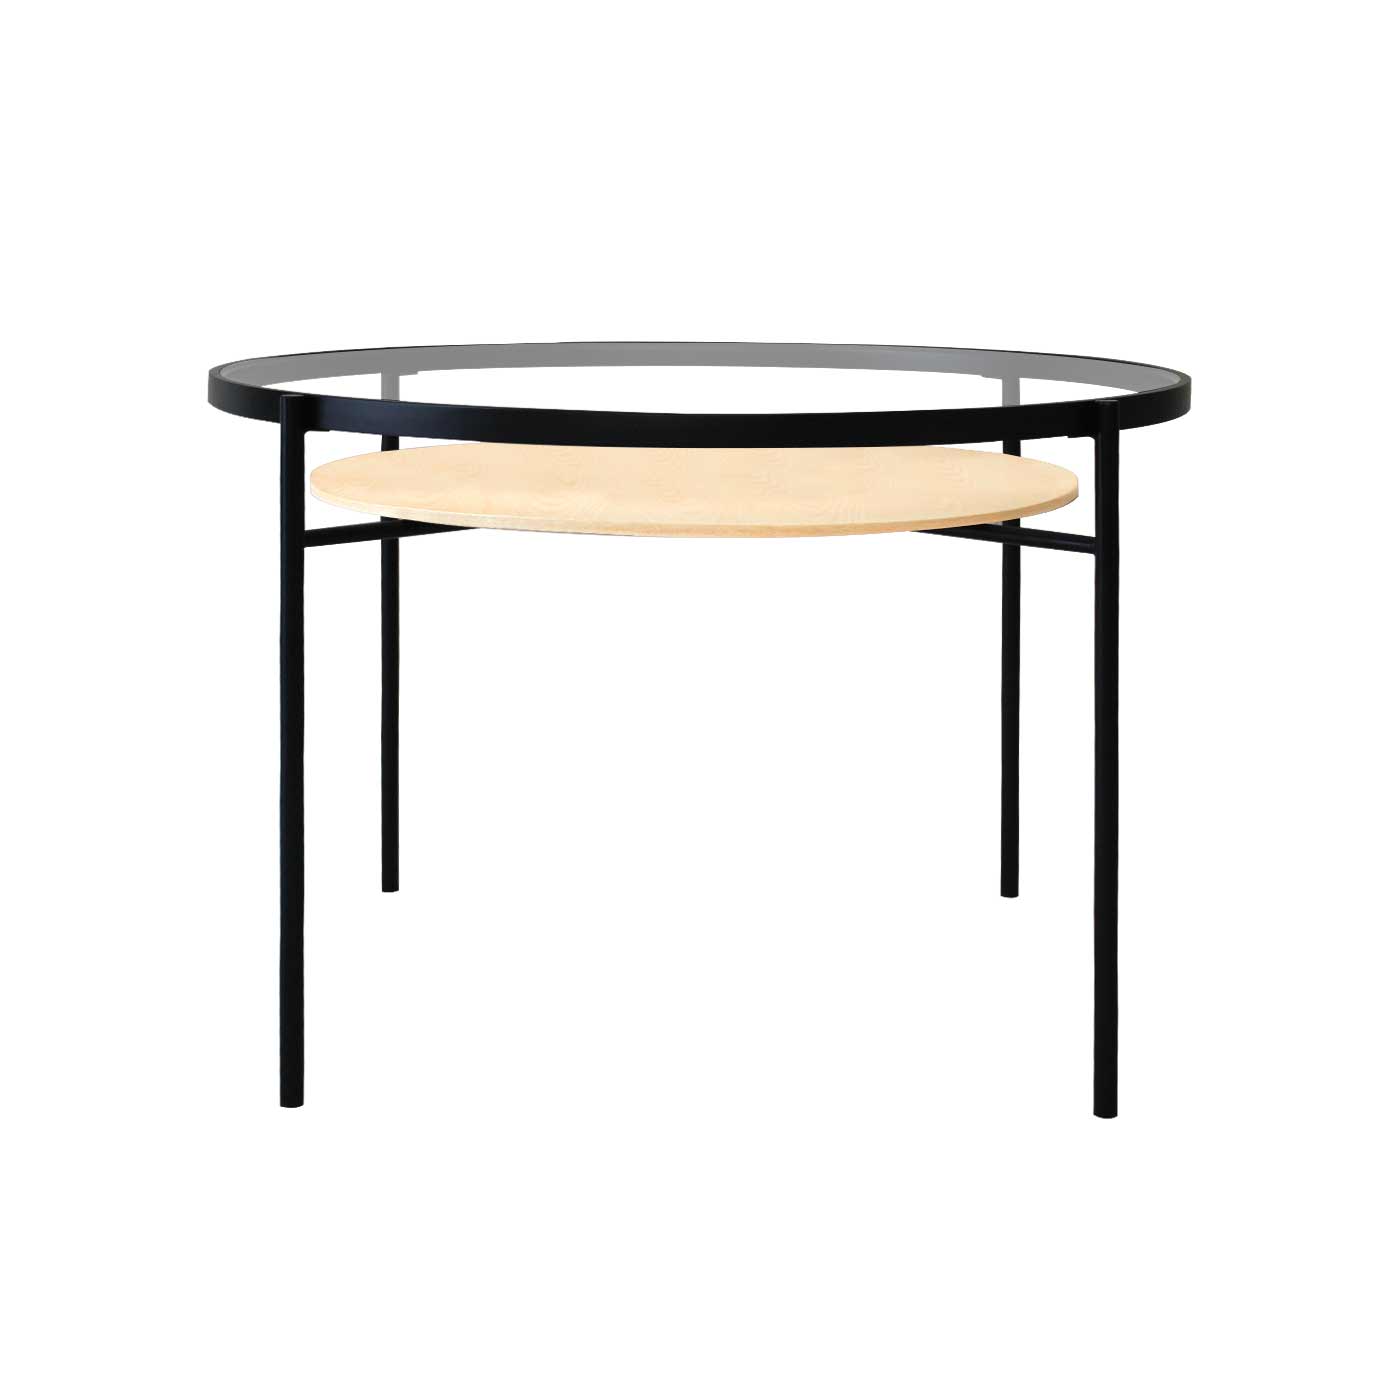 Sheffield Light Glass Round Conference Table